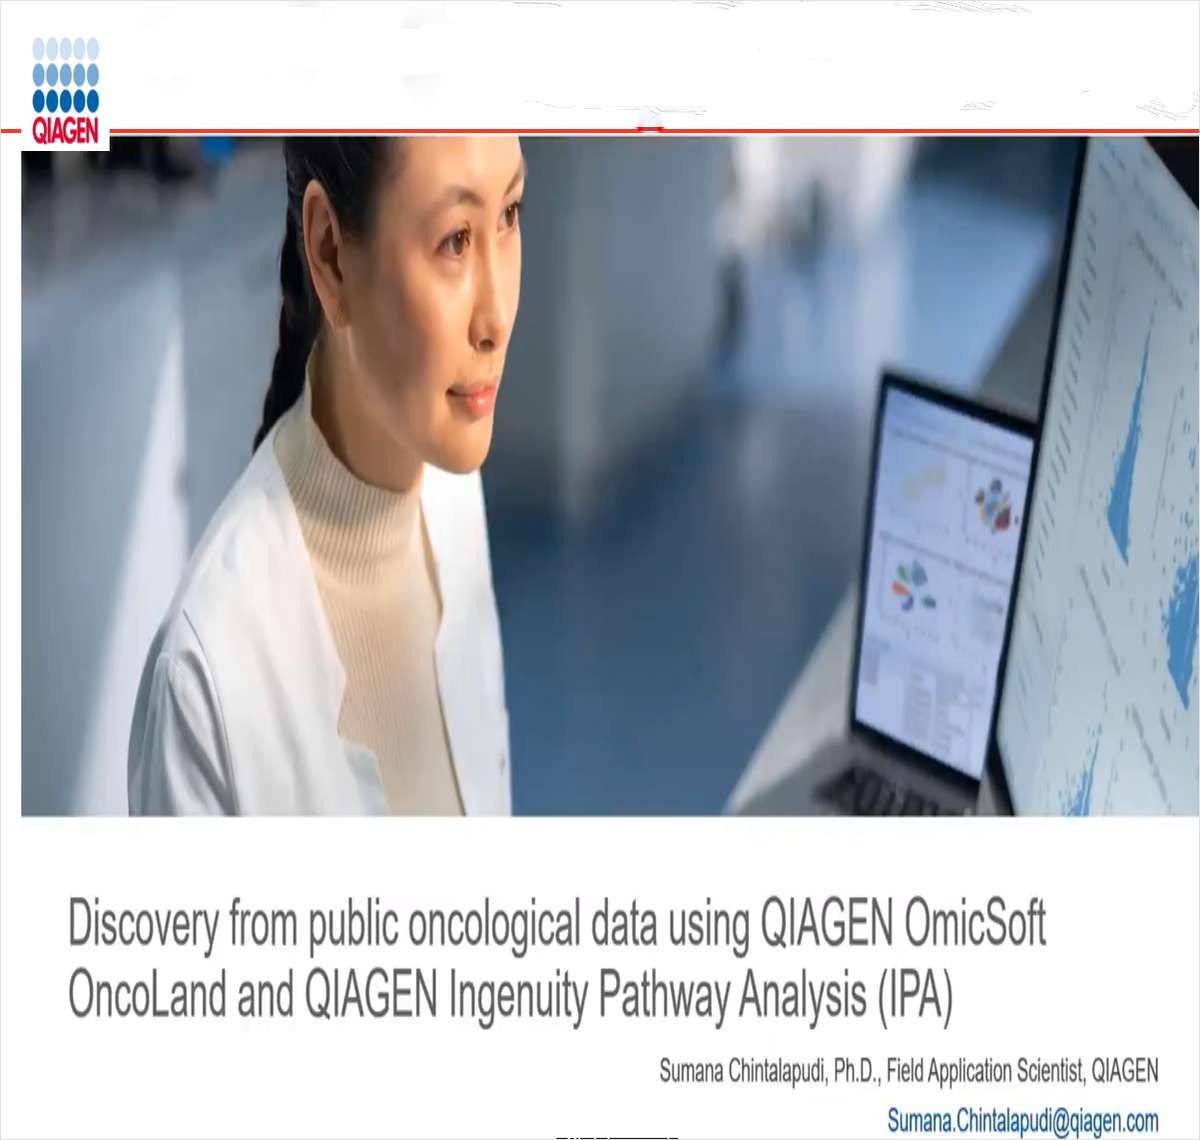 Discovery from Public Oncological Data Using Qiagen Omicsoft OncoLand and Qiagen Ingenuity Pathway Analysis